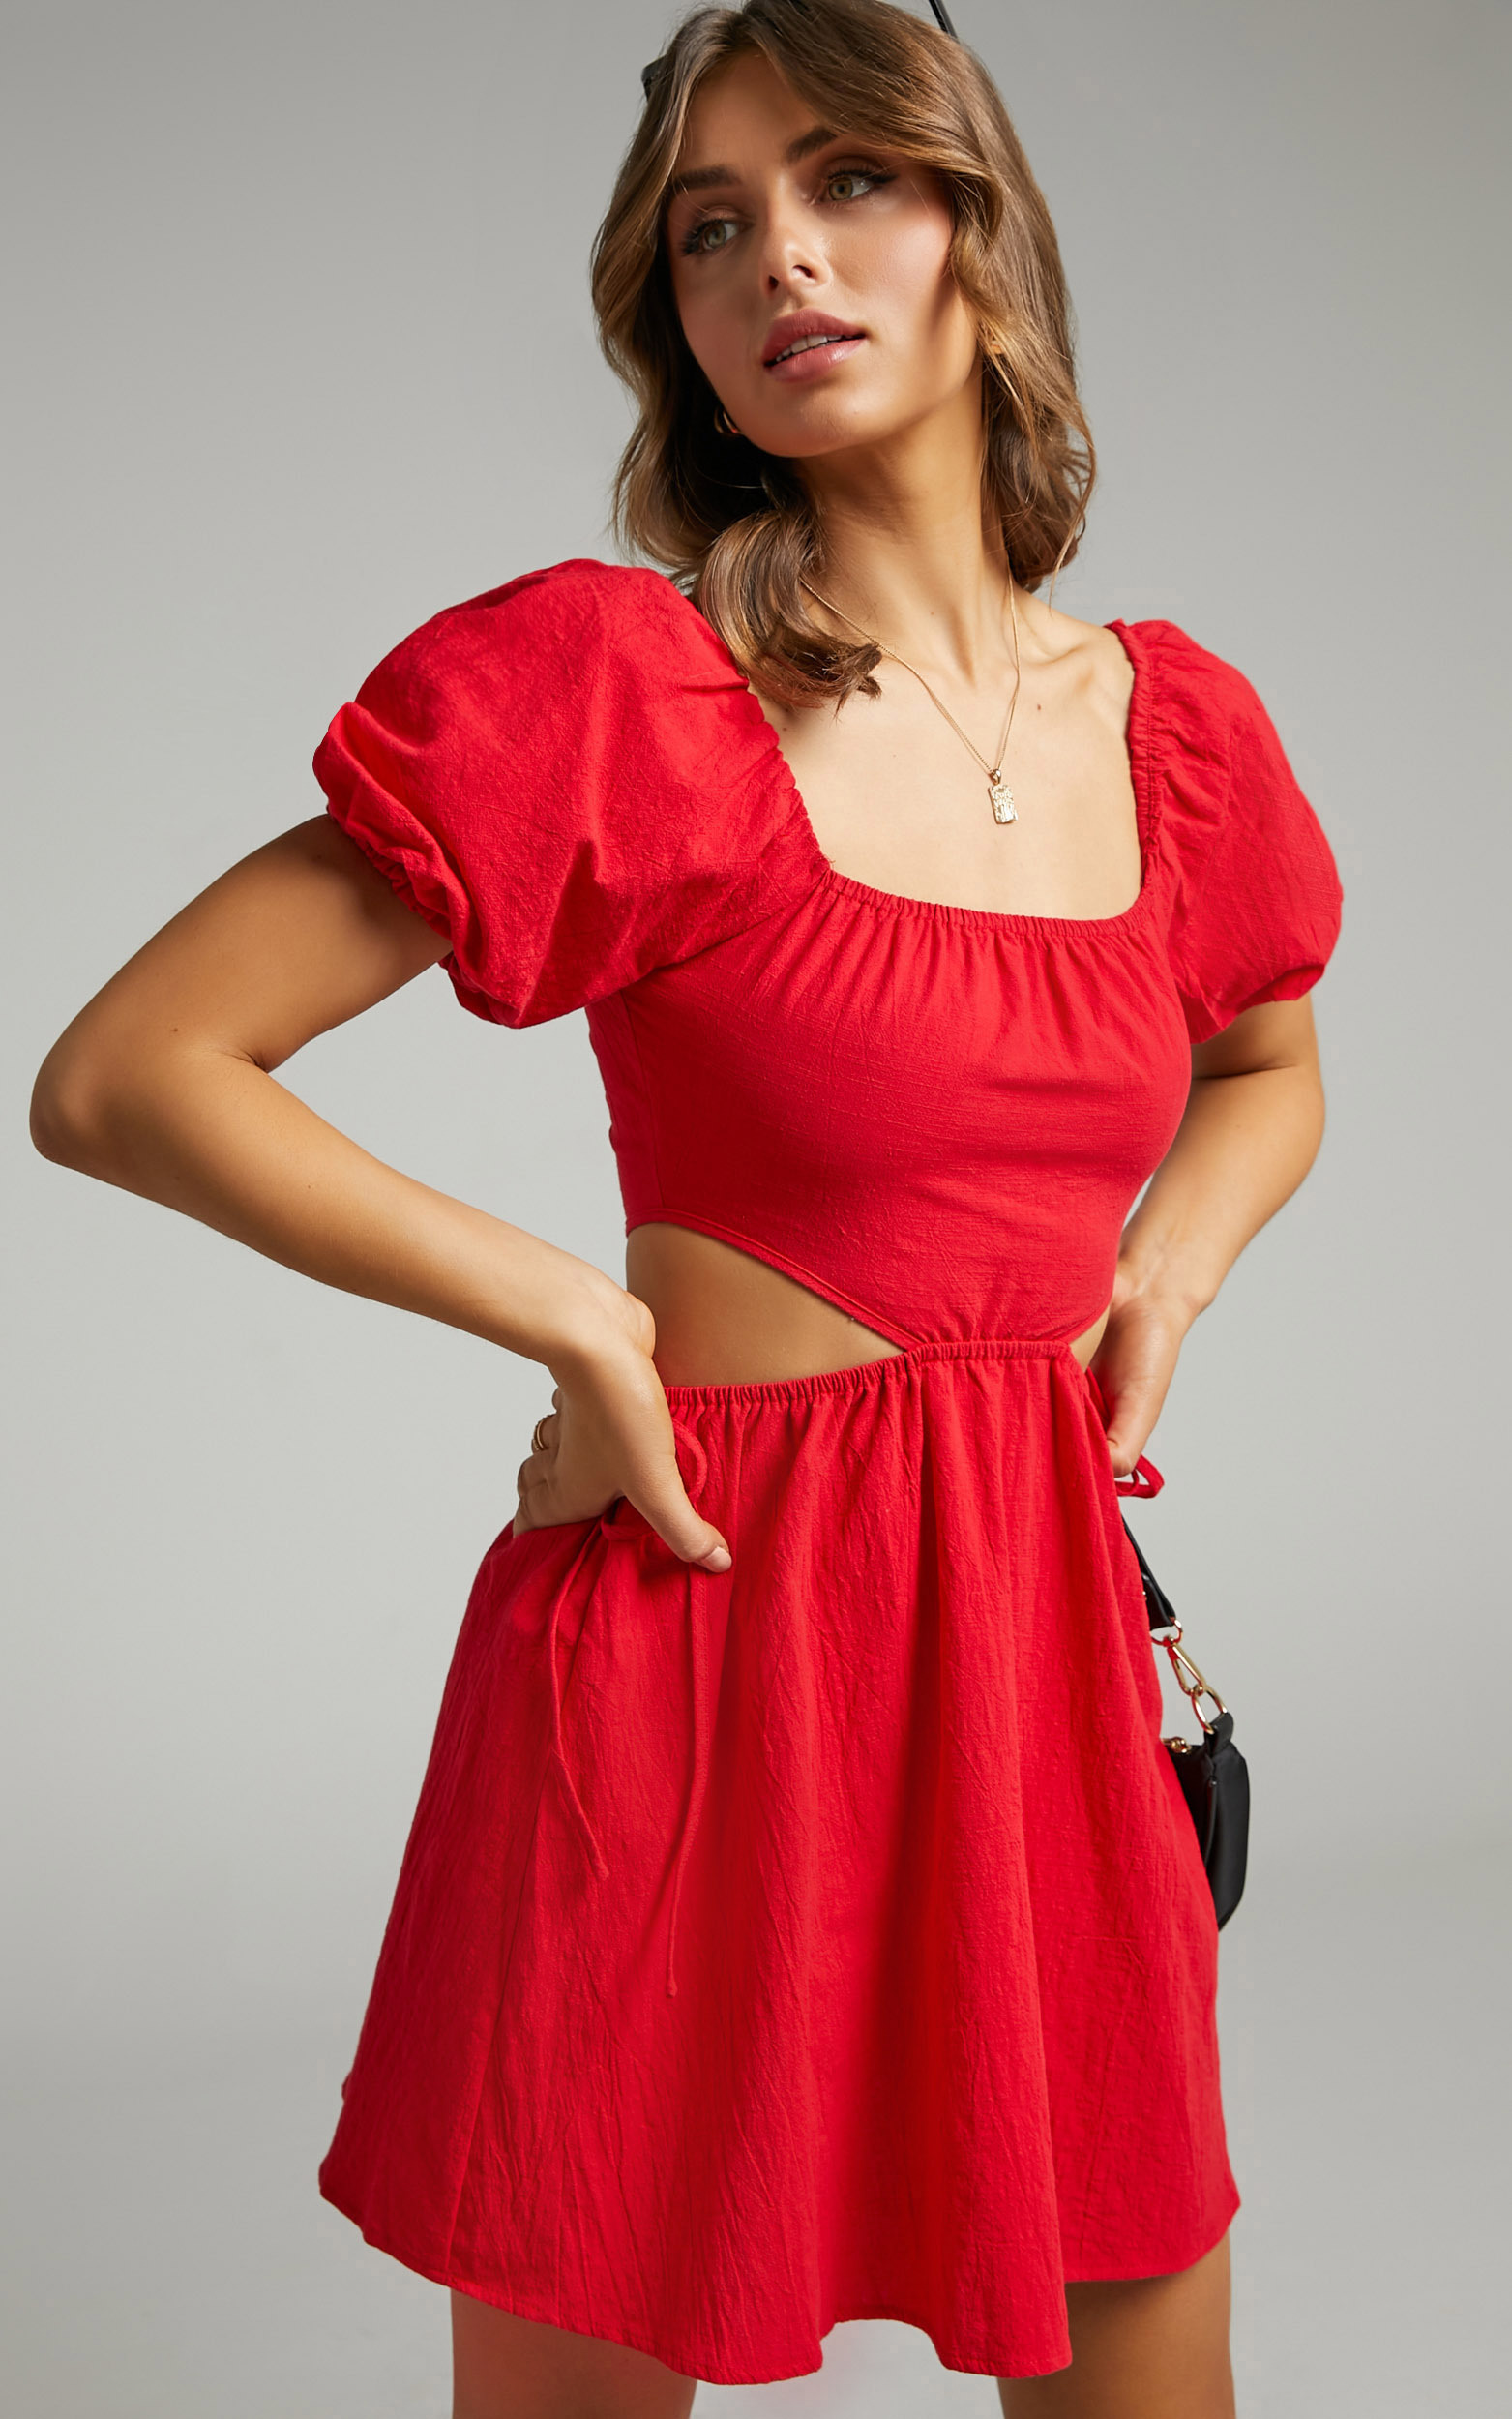 Loriella Waist Cut Out Skater Skirt Dress in Red - 06, RED2, hi-res image number null